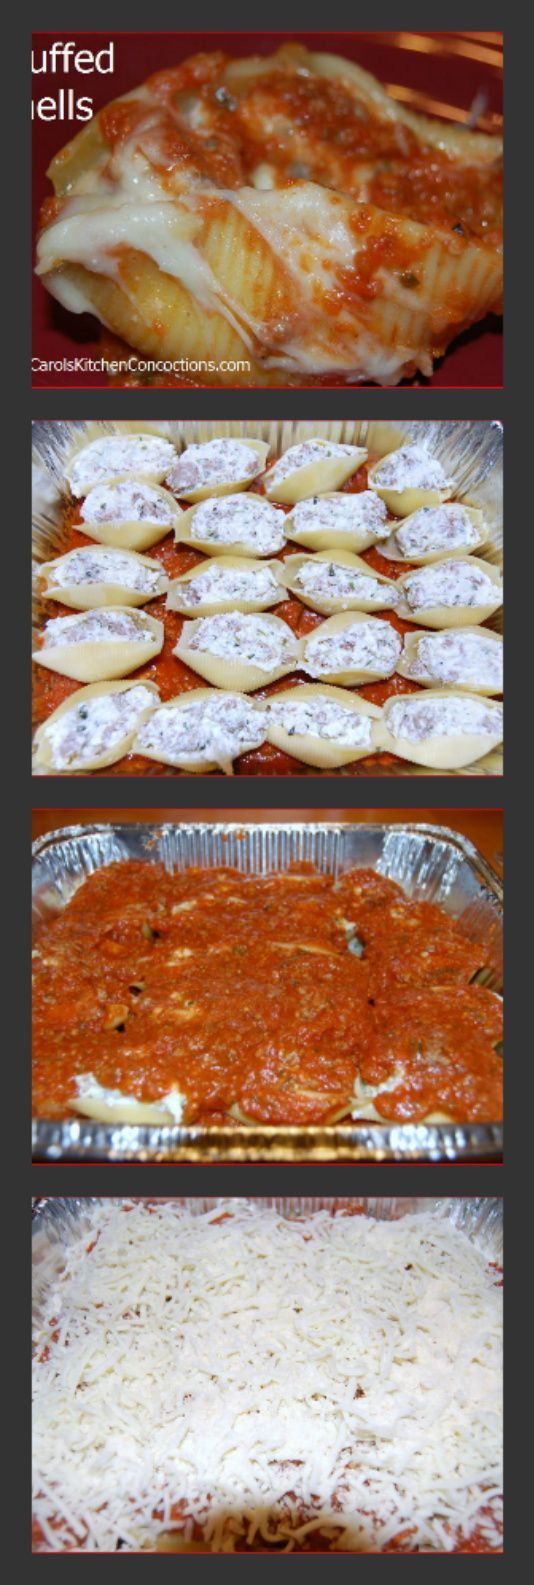 How to make stuffed shells. My all time fave special occasion dinners my mom would make for me